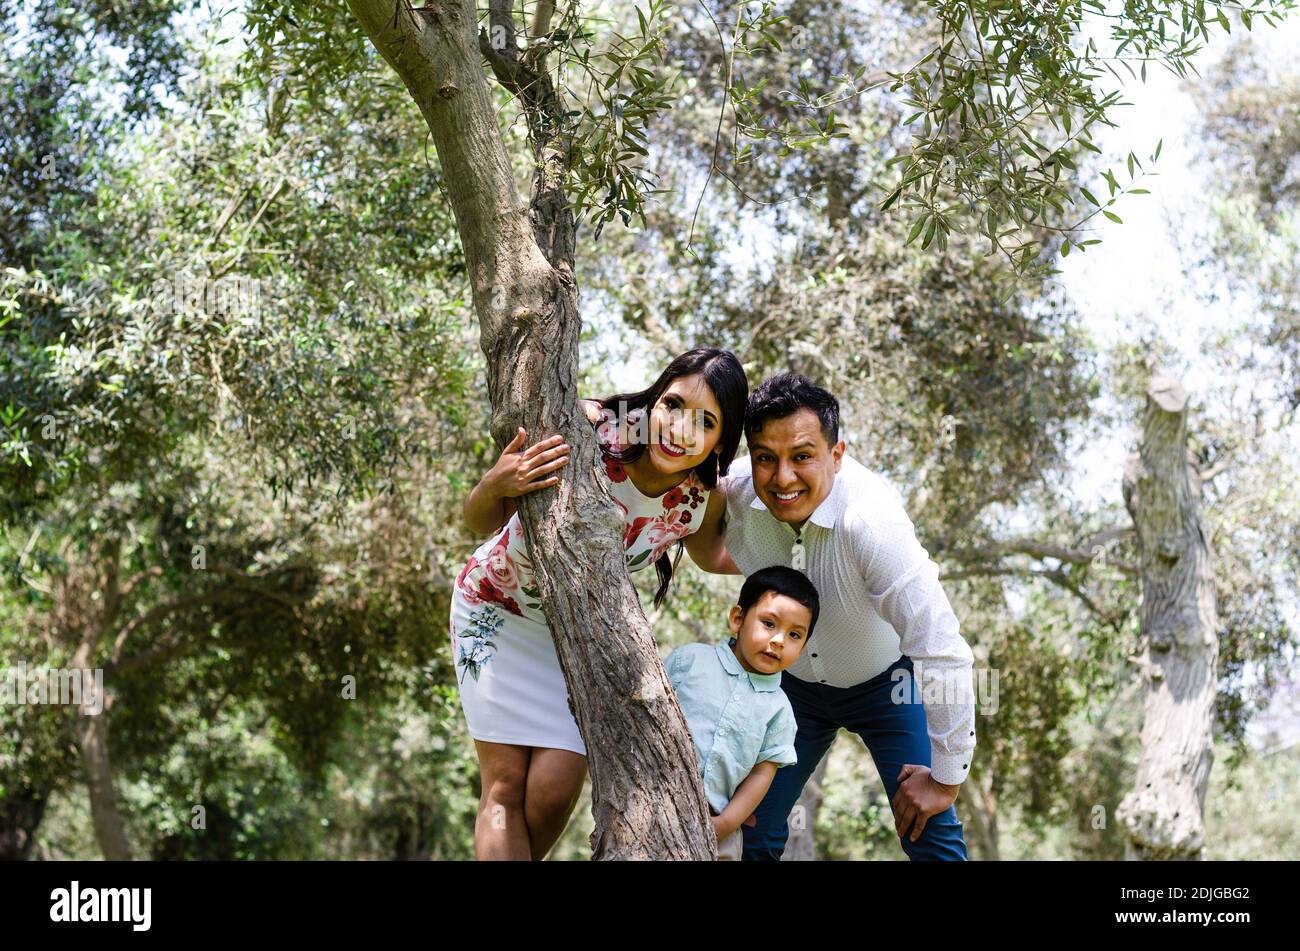 Happy family with man, woman and child leaning on tree in city park. Copy space Stock Photo